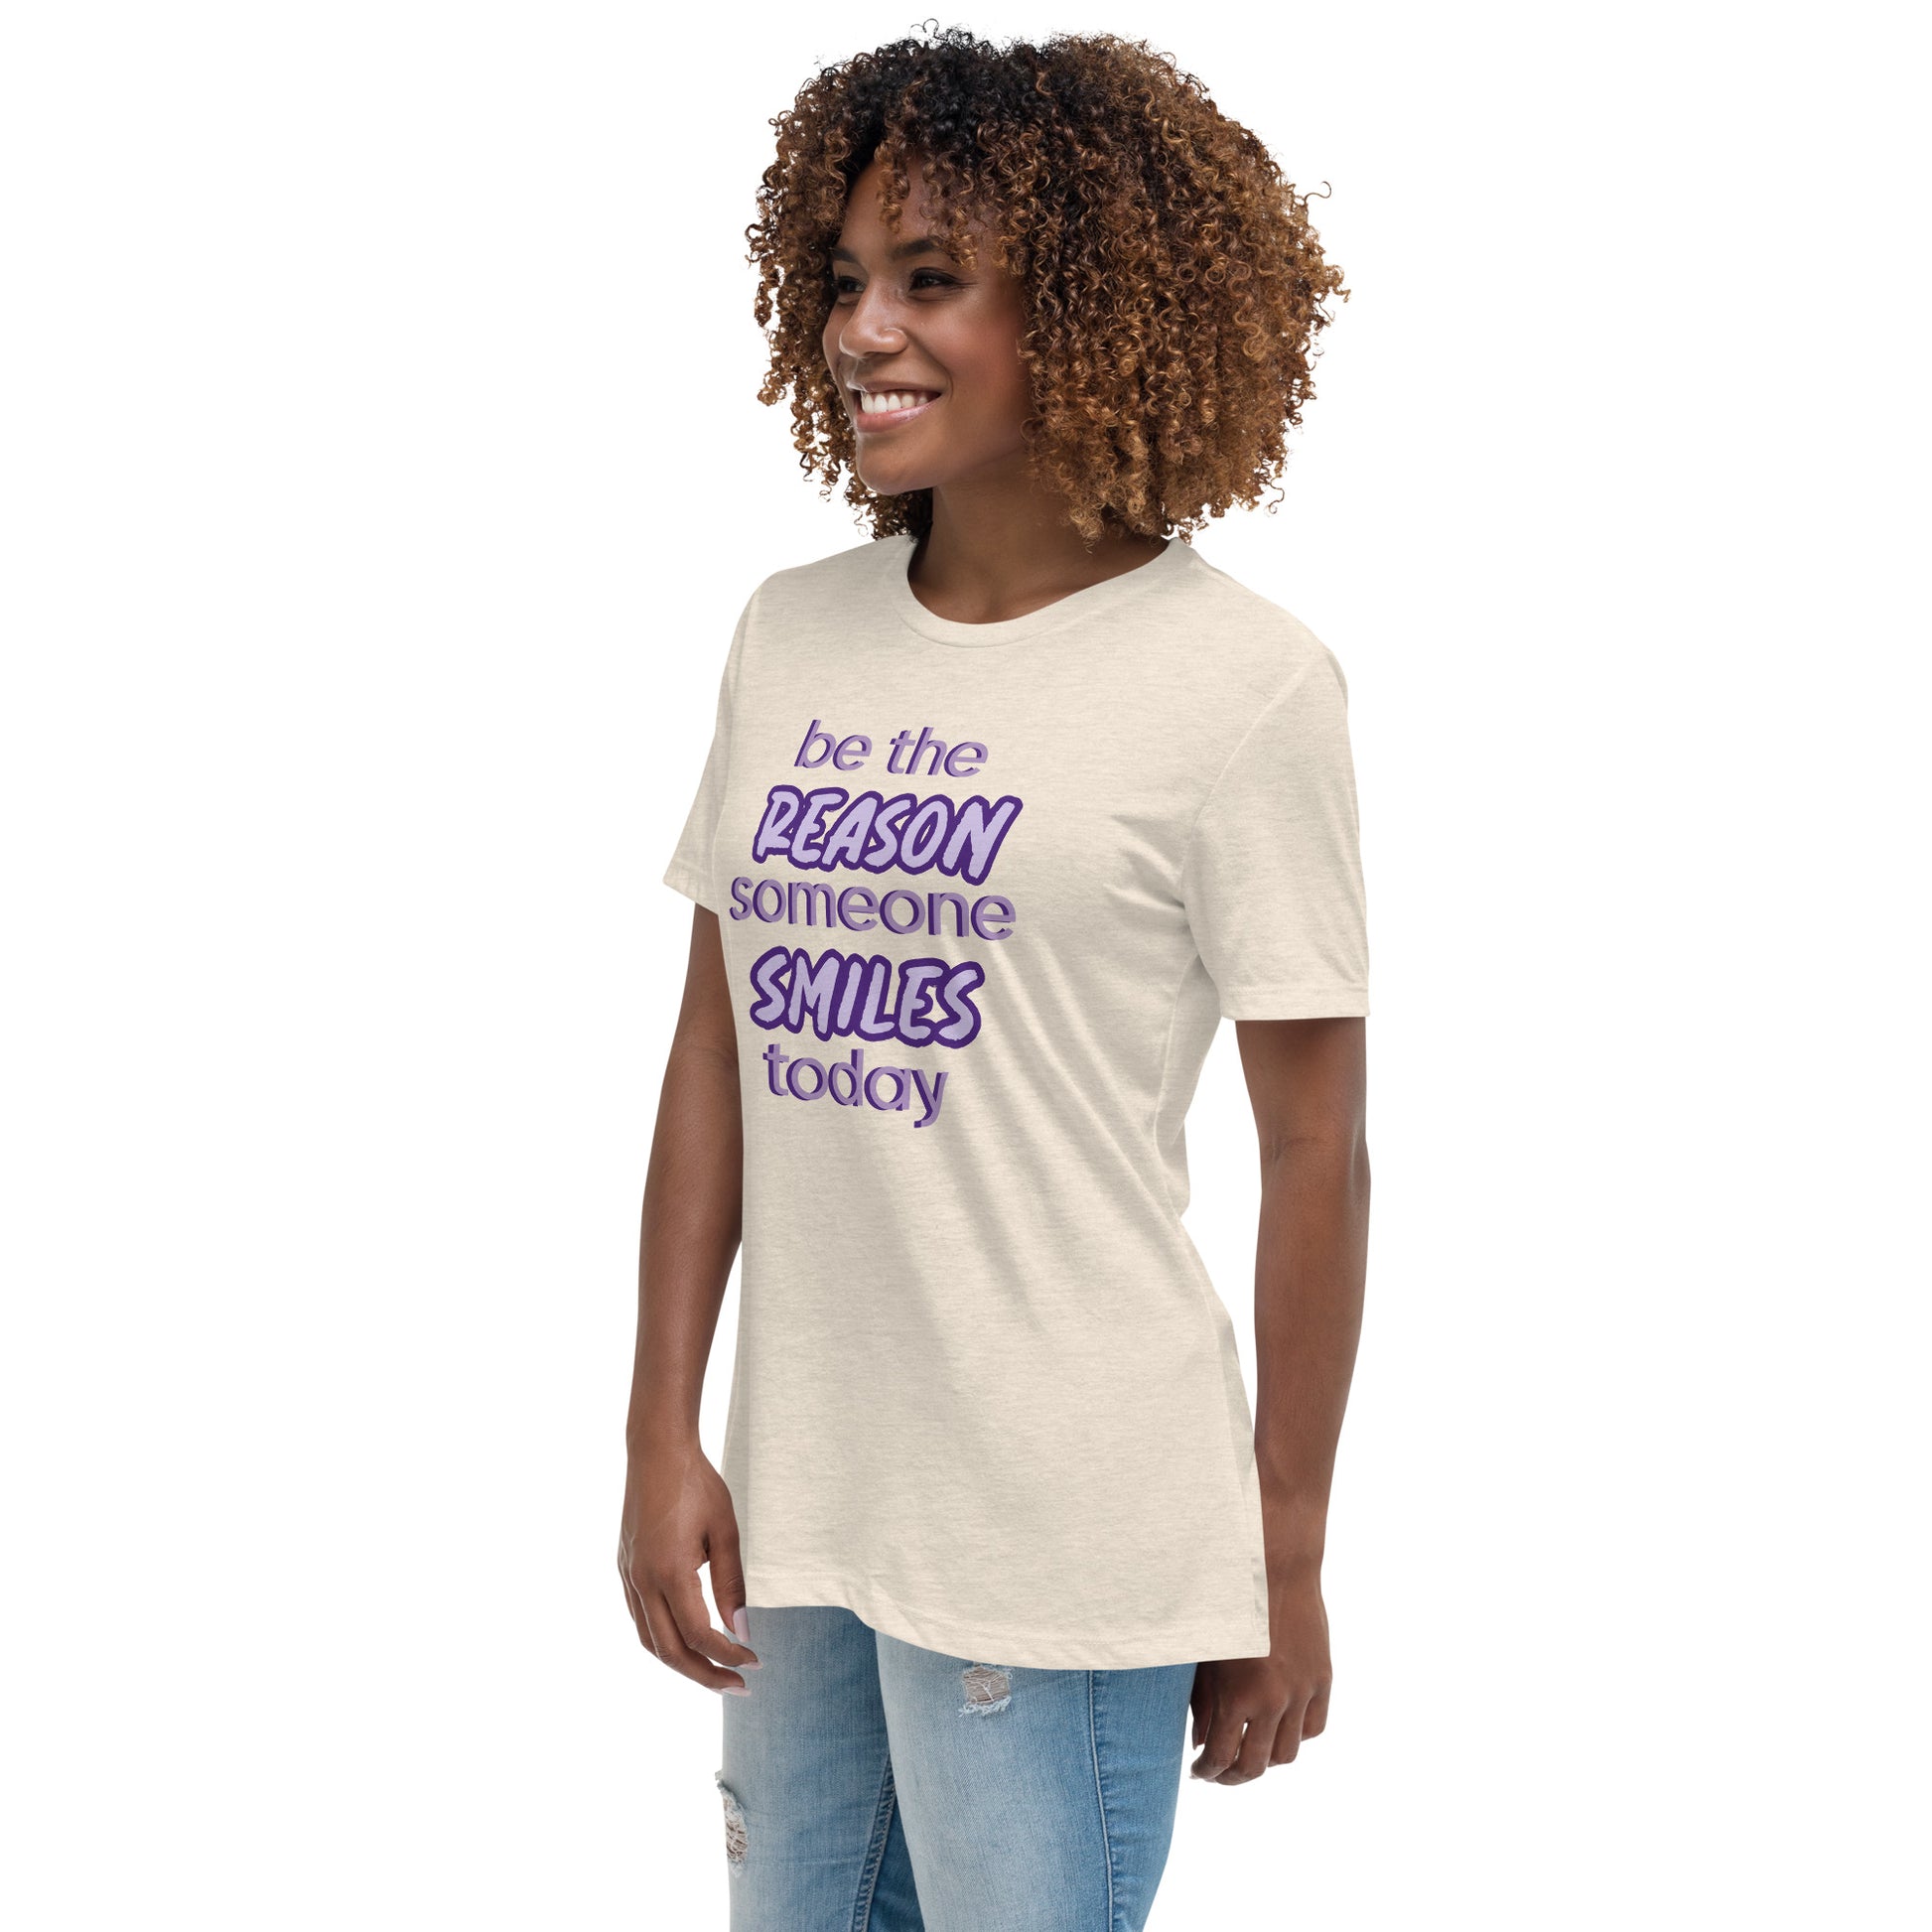 Woman with naturel T-shirt and the quote "be the reason someone smiles today" in purple on it. 